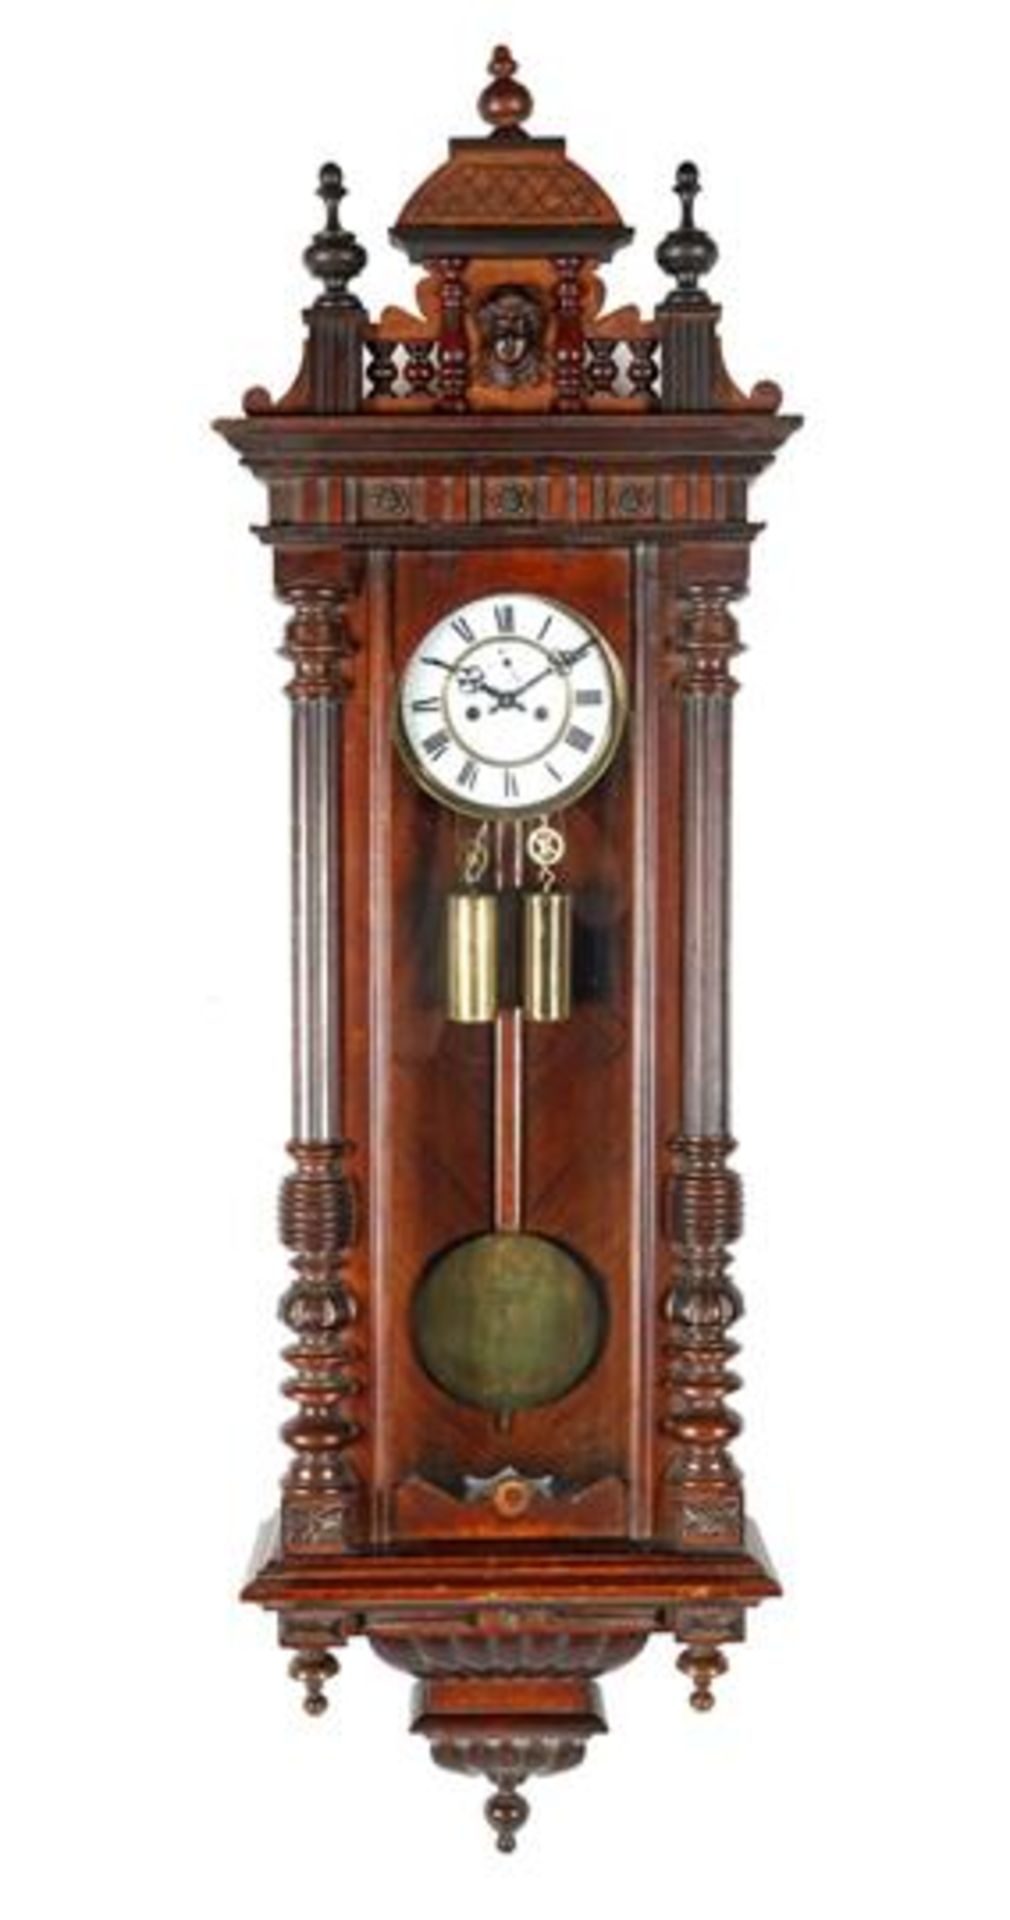 Regulator in richly decorated walnut case with crest, 142 cm high (eyelet on front side missing)